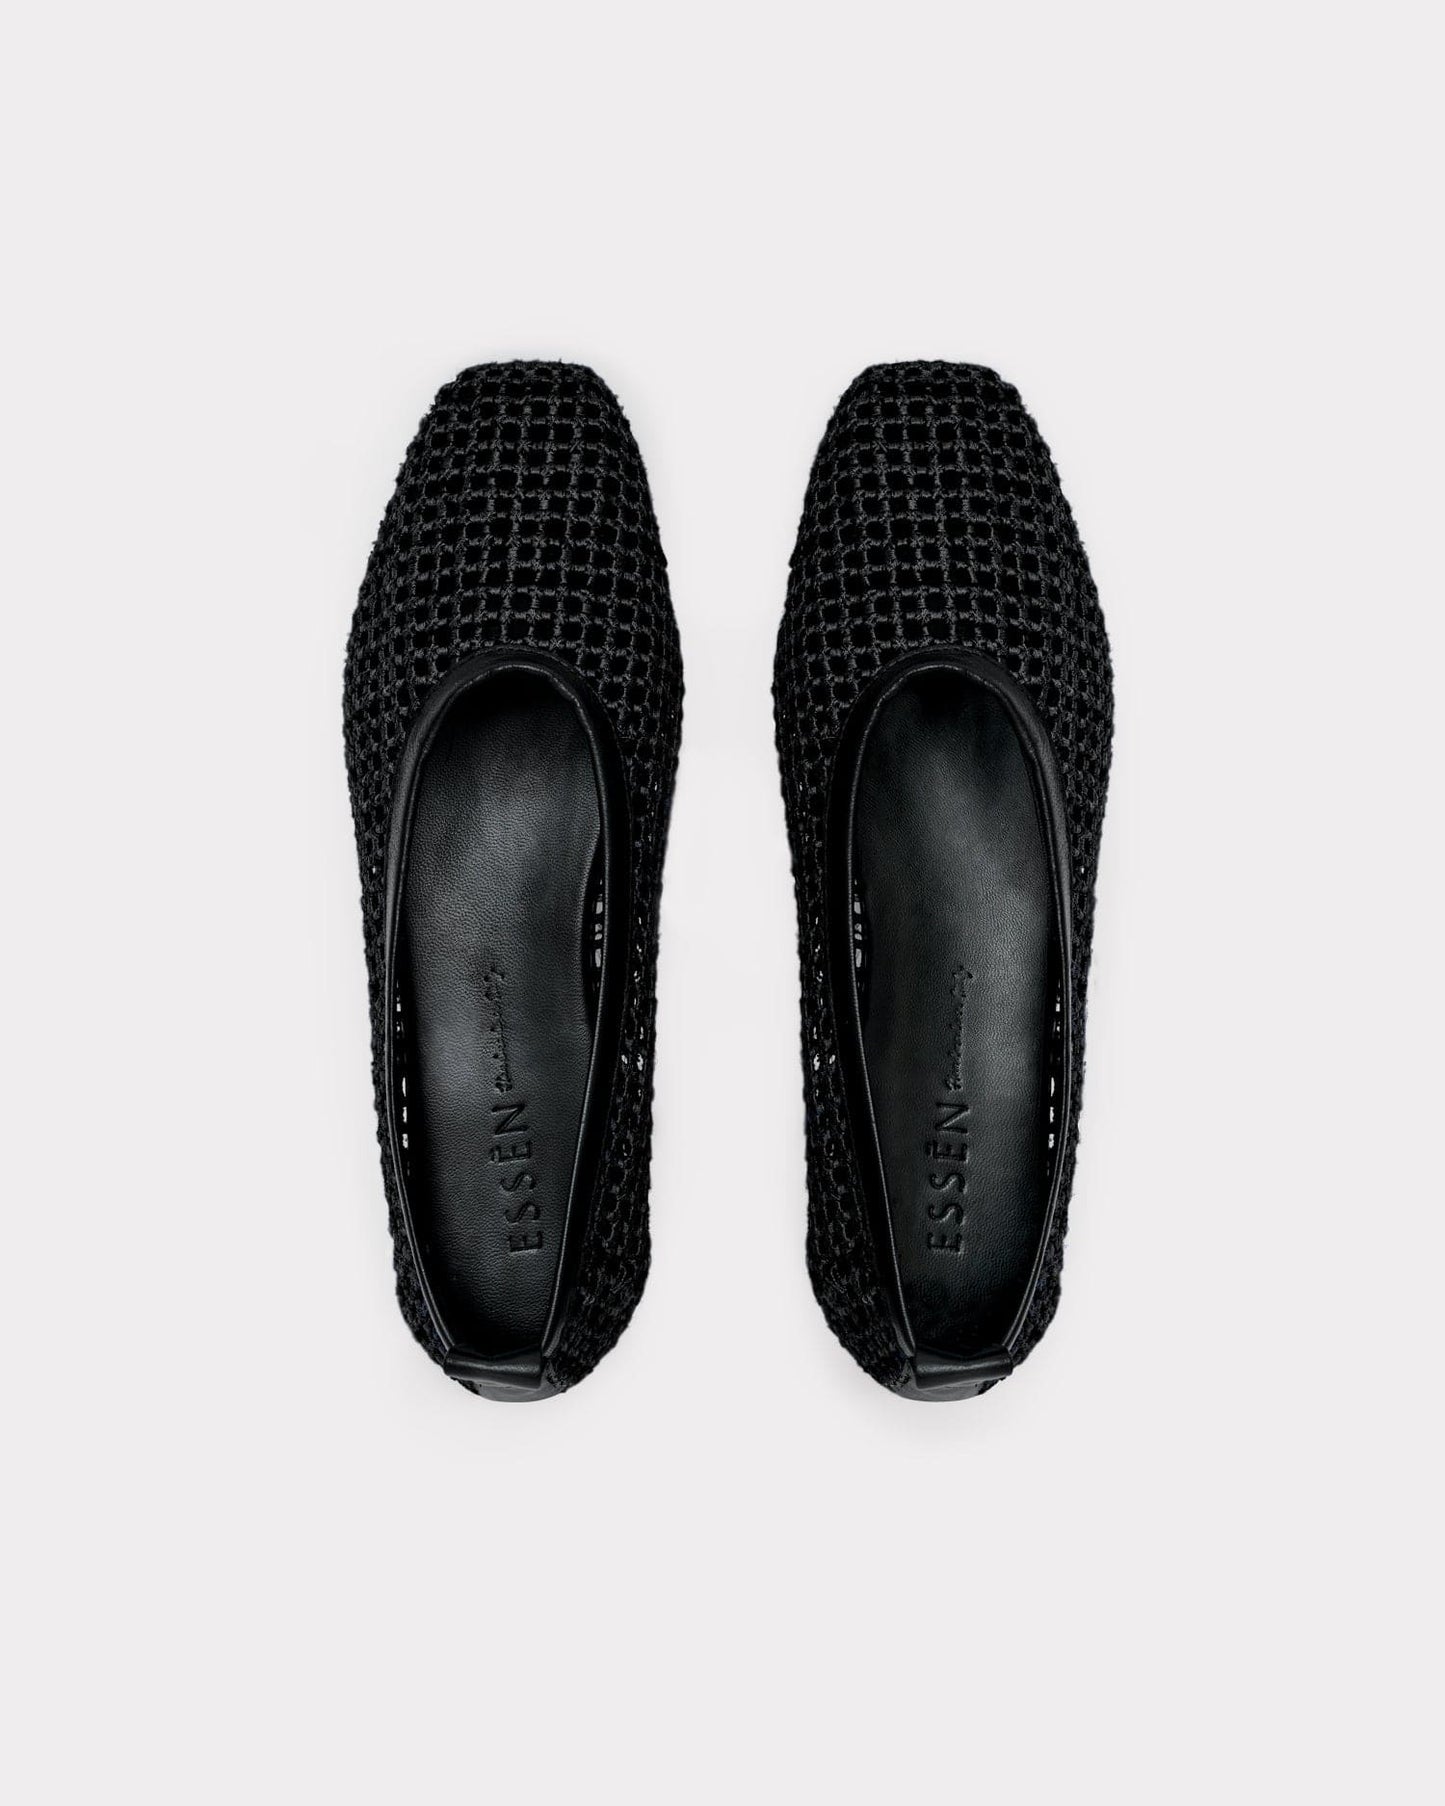 The Foundation Flat - Black Woven